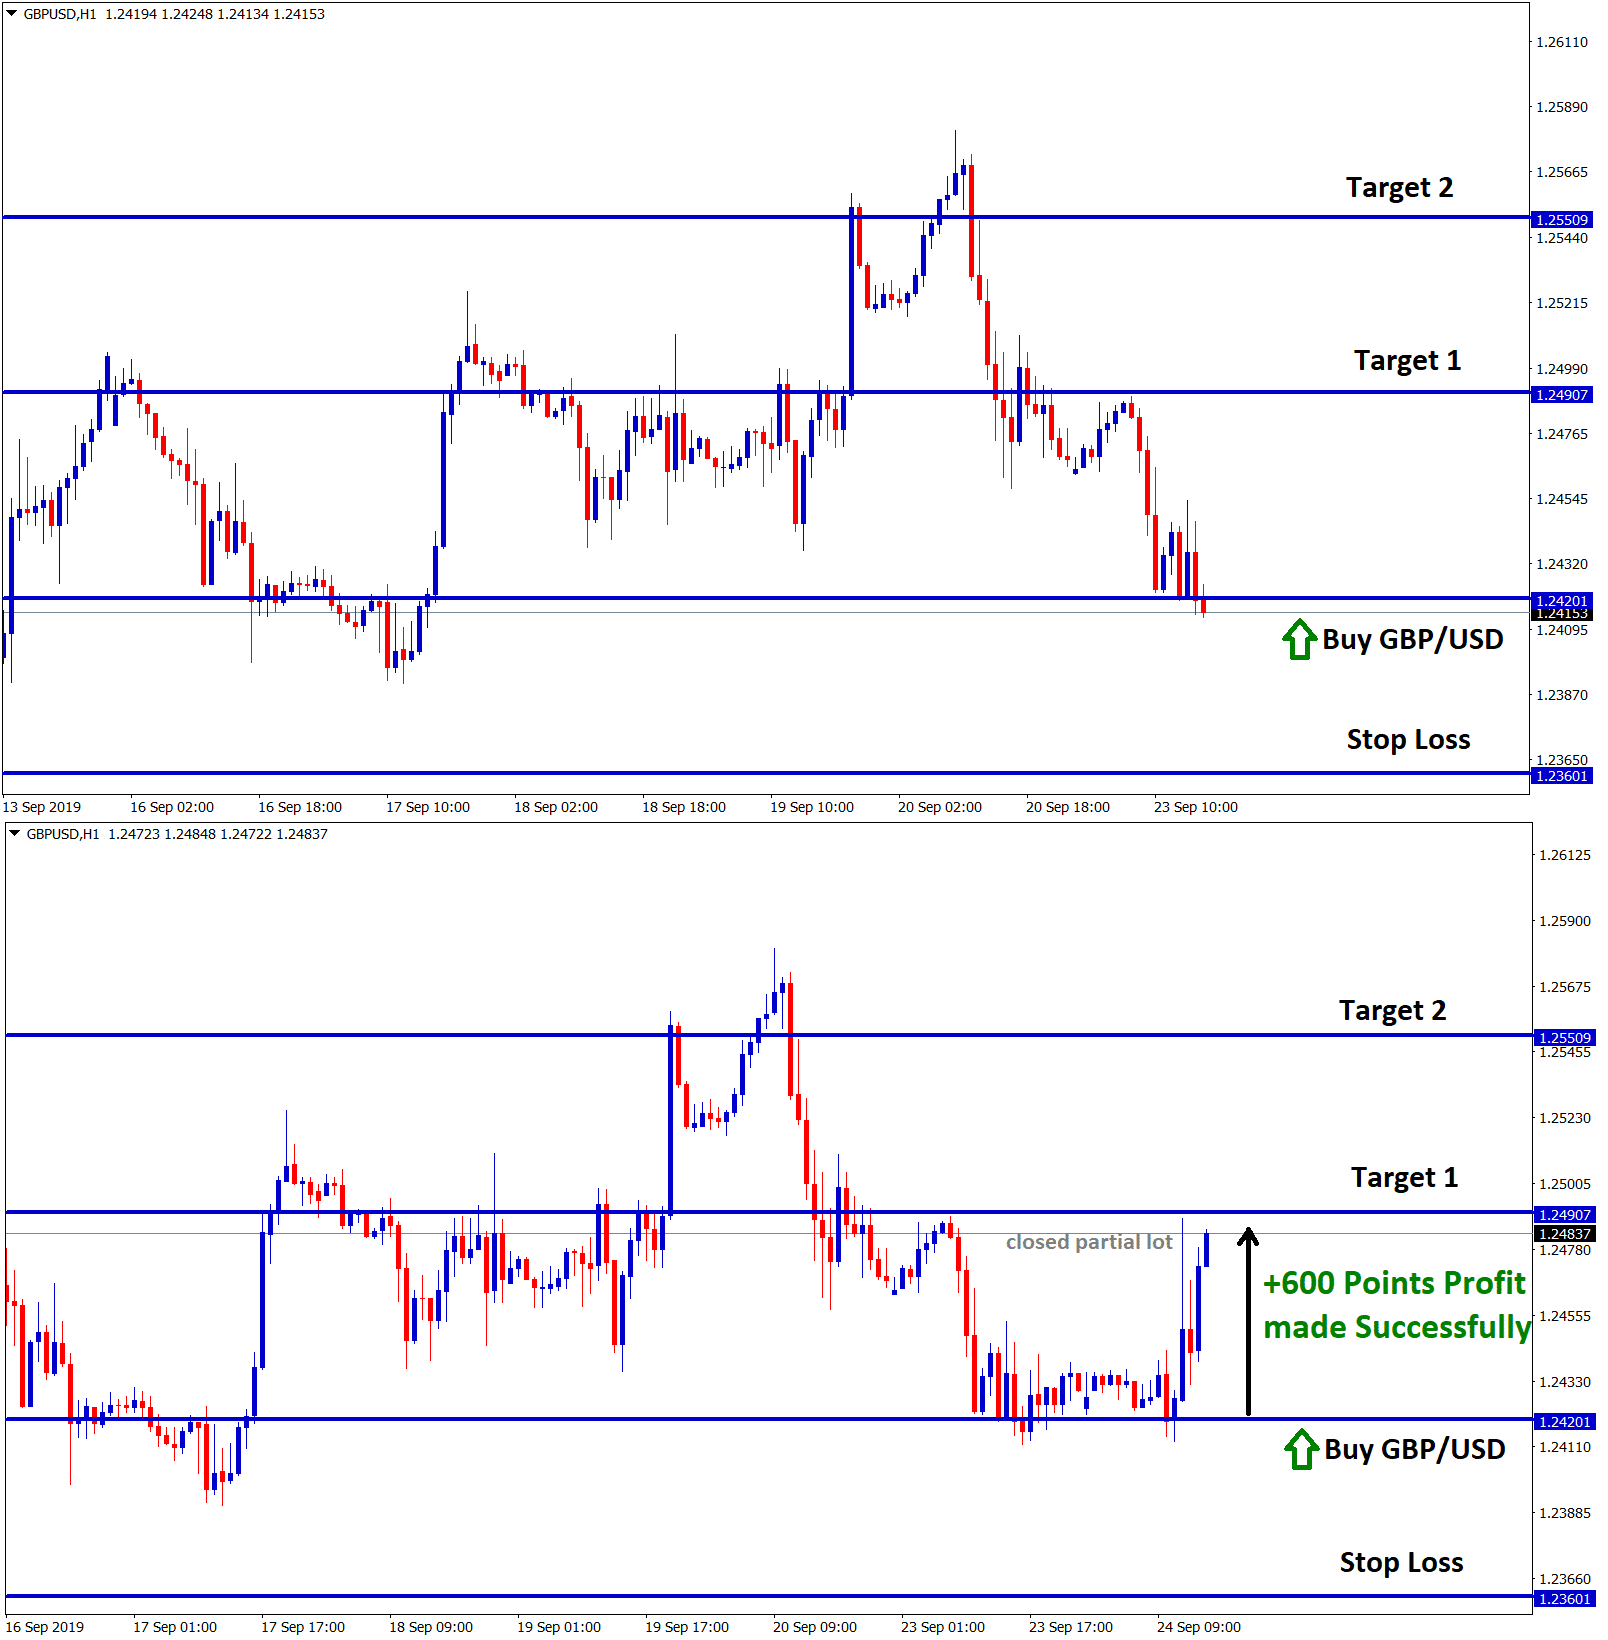 gbp usd buy signal hits take profit with +600 points